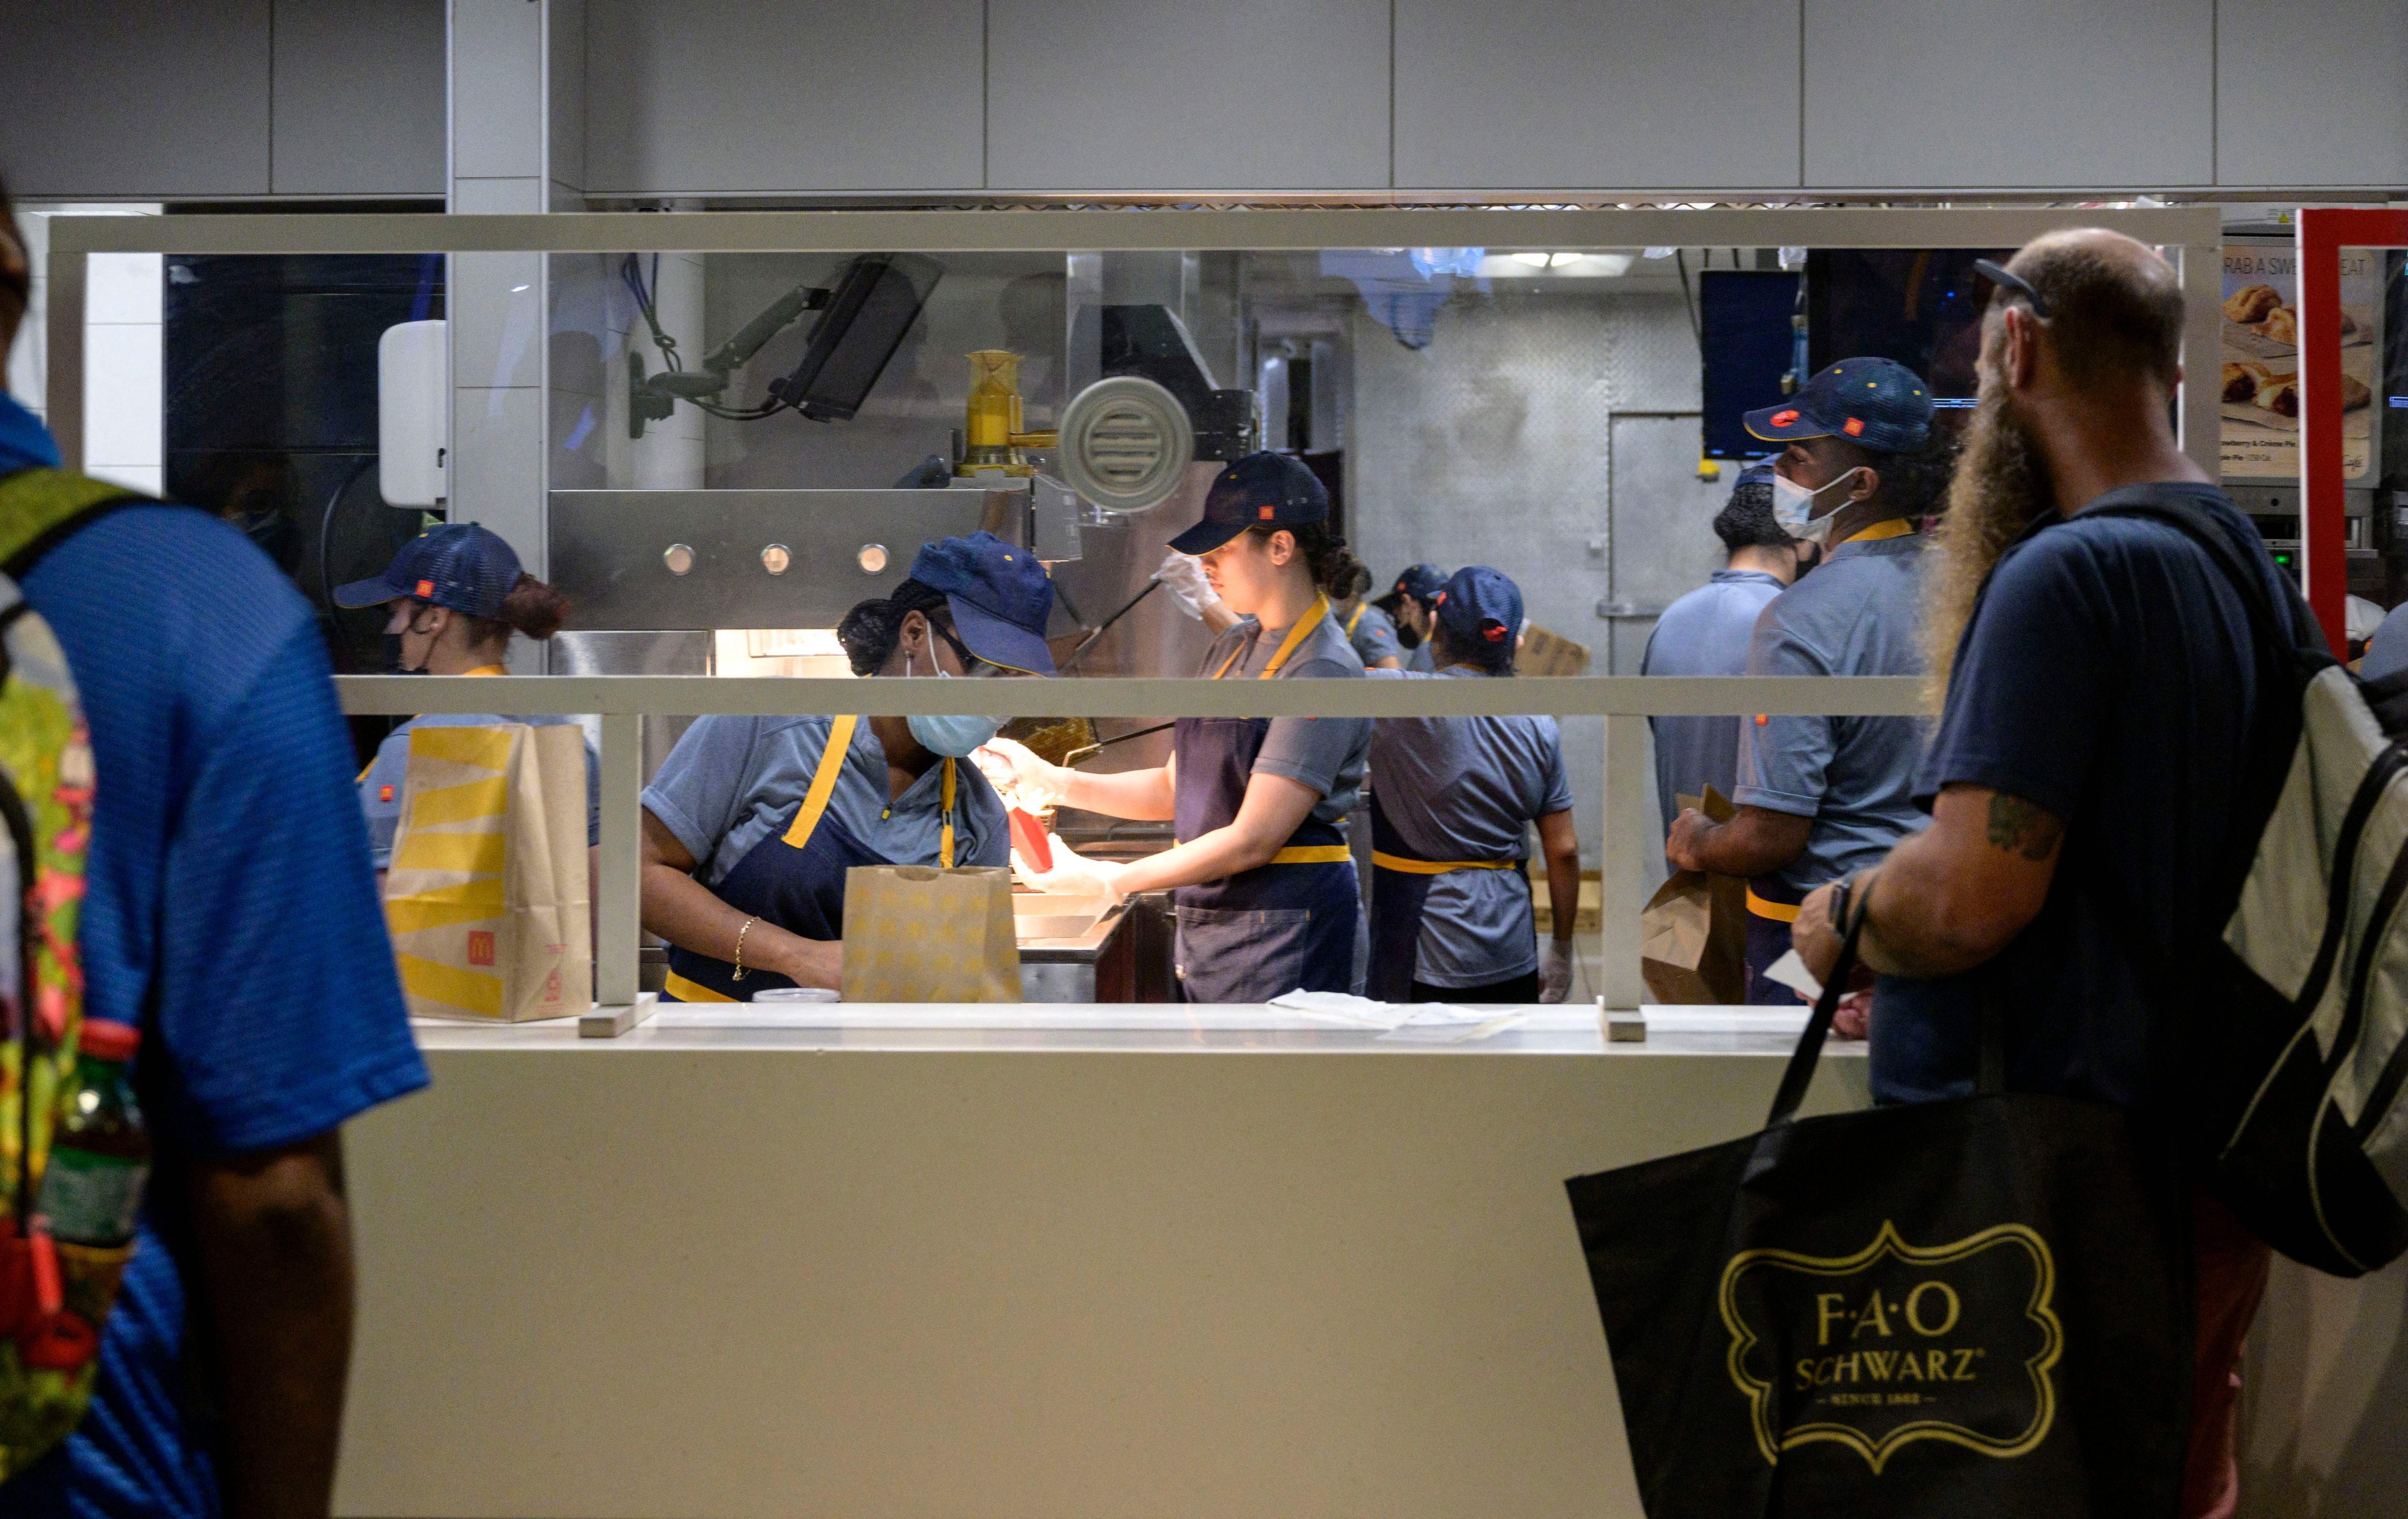 Employees prepare a customer's order at a McDonald's fast food restaurant in New York on May 27, 2022. (Angela Weiss — AFP via Getty Images)